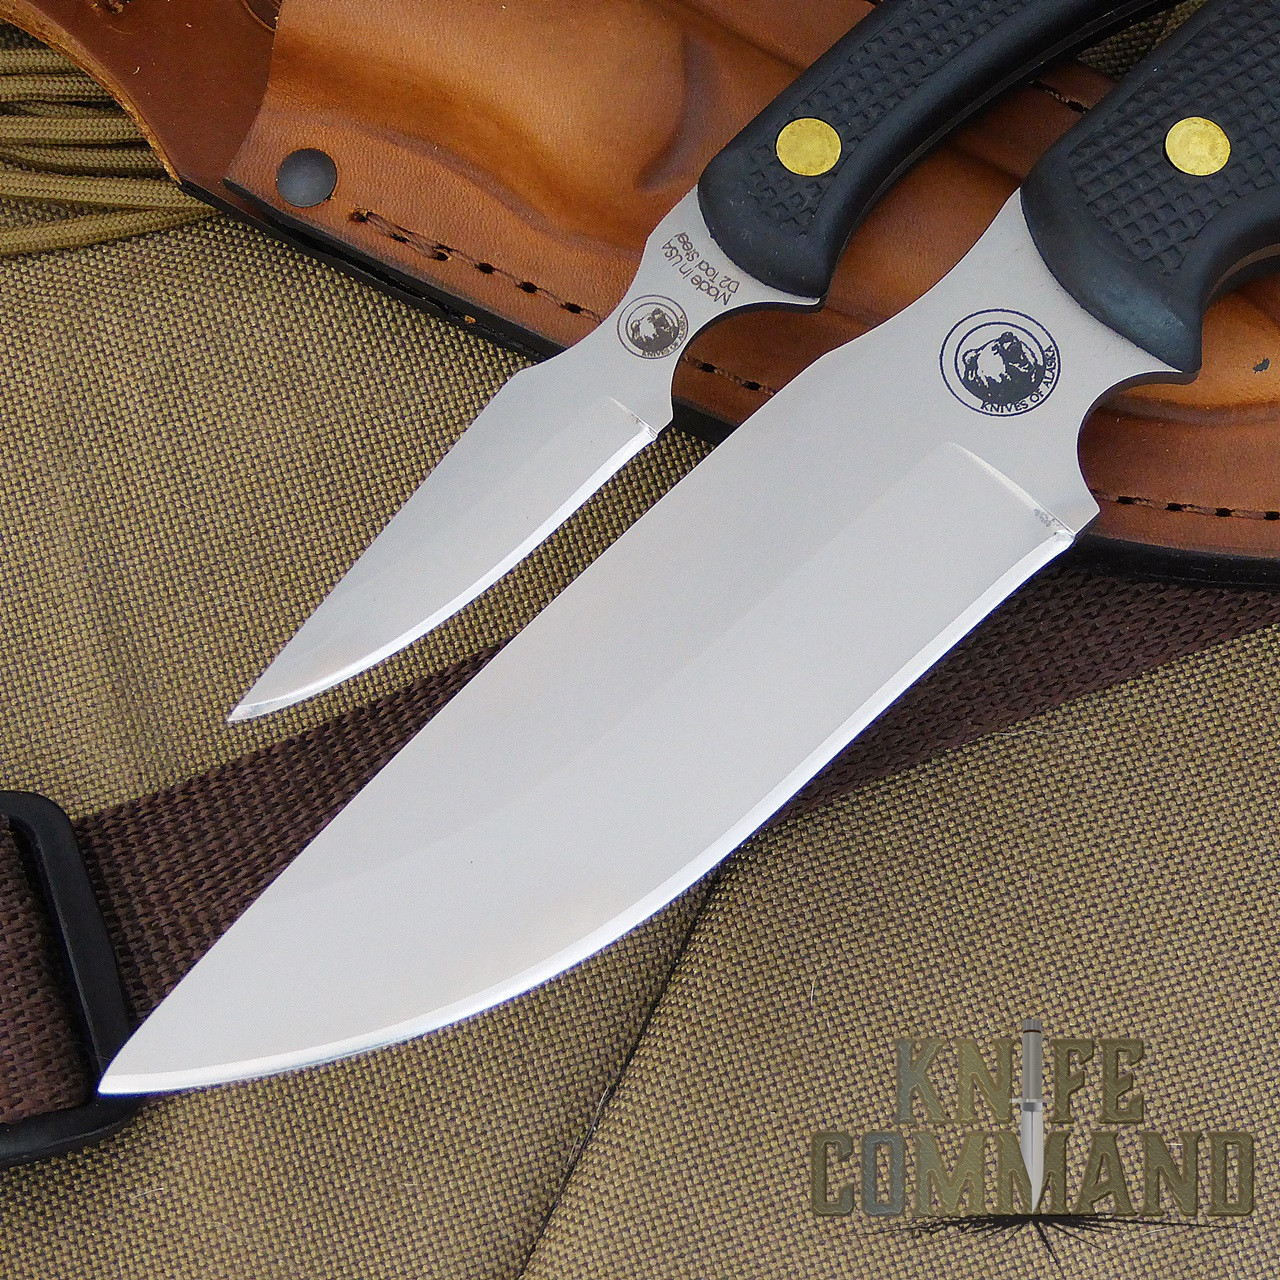 Knives of Alaska Bush Camp Suregrip Hunting Knife Combo.  Two different blades handle all the cutting chores.